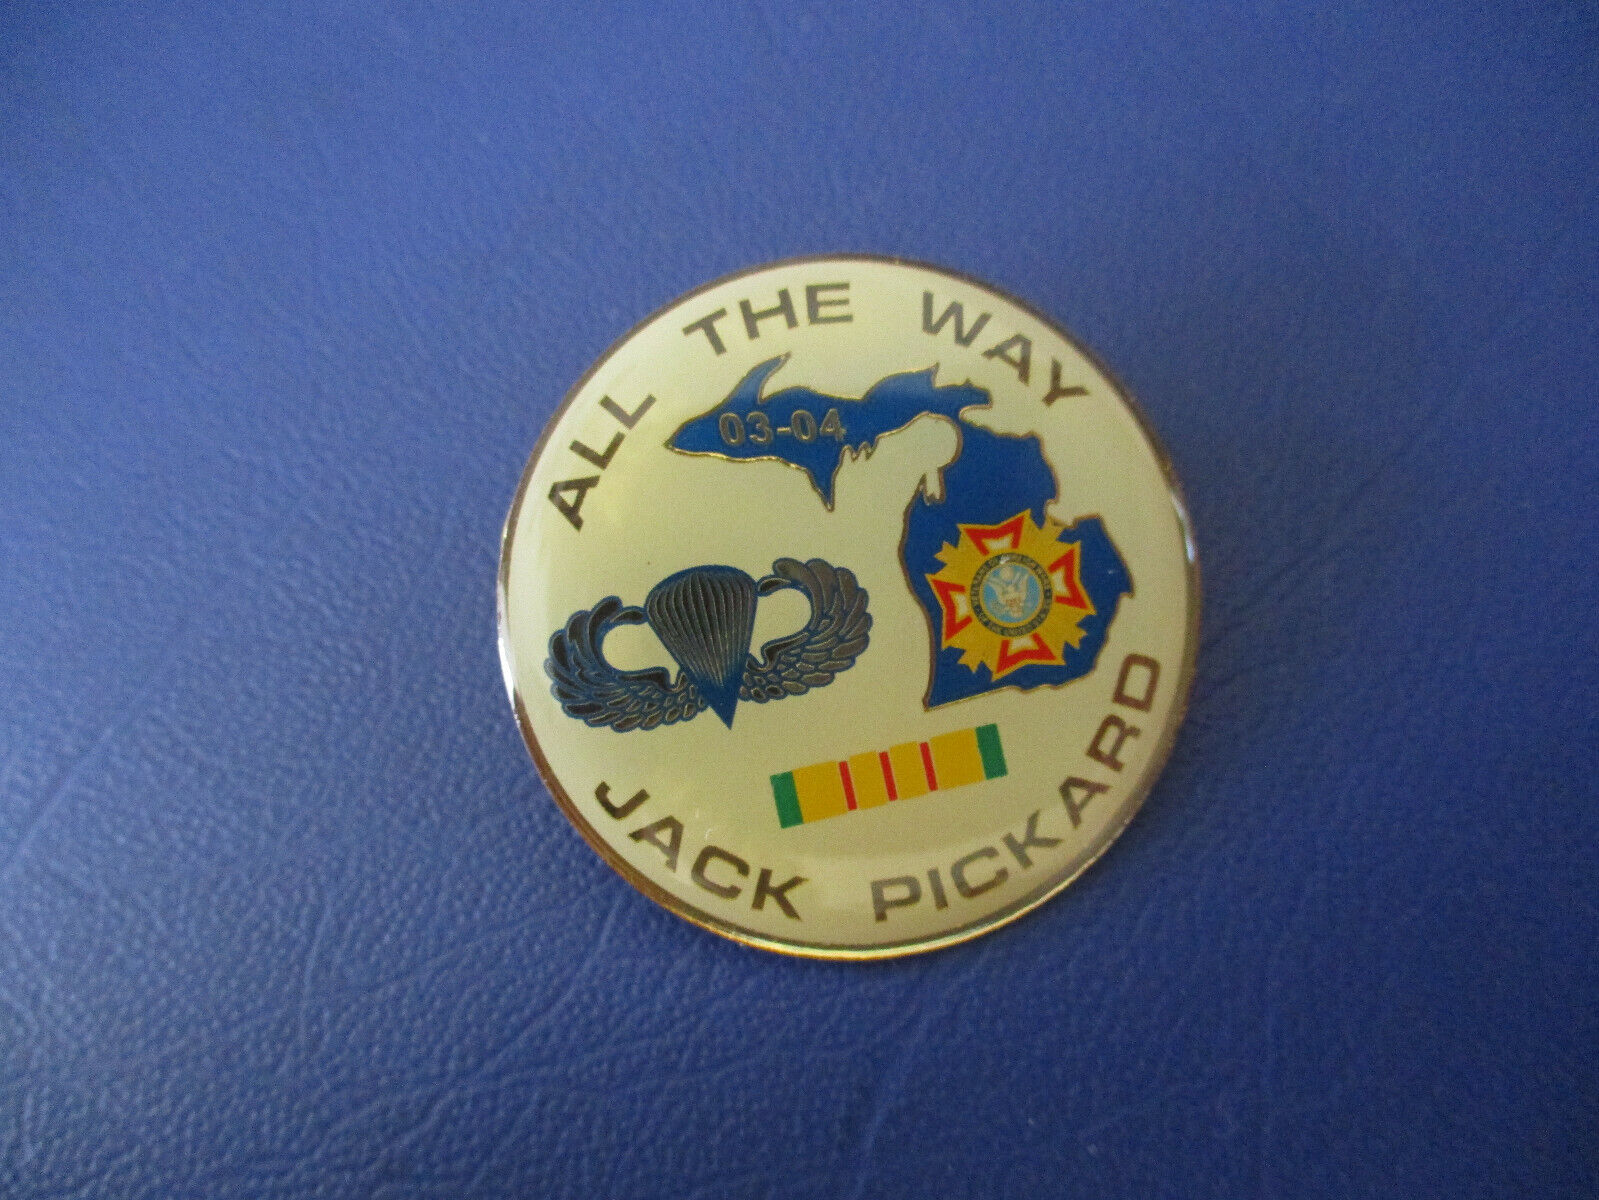 Vintage 2003-04 Veterans of Foreign Wars All the Way Jack Pickard Lapel Pin *